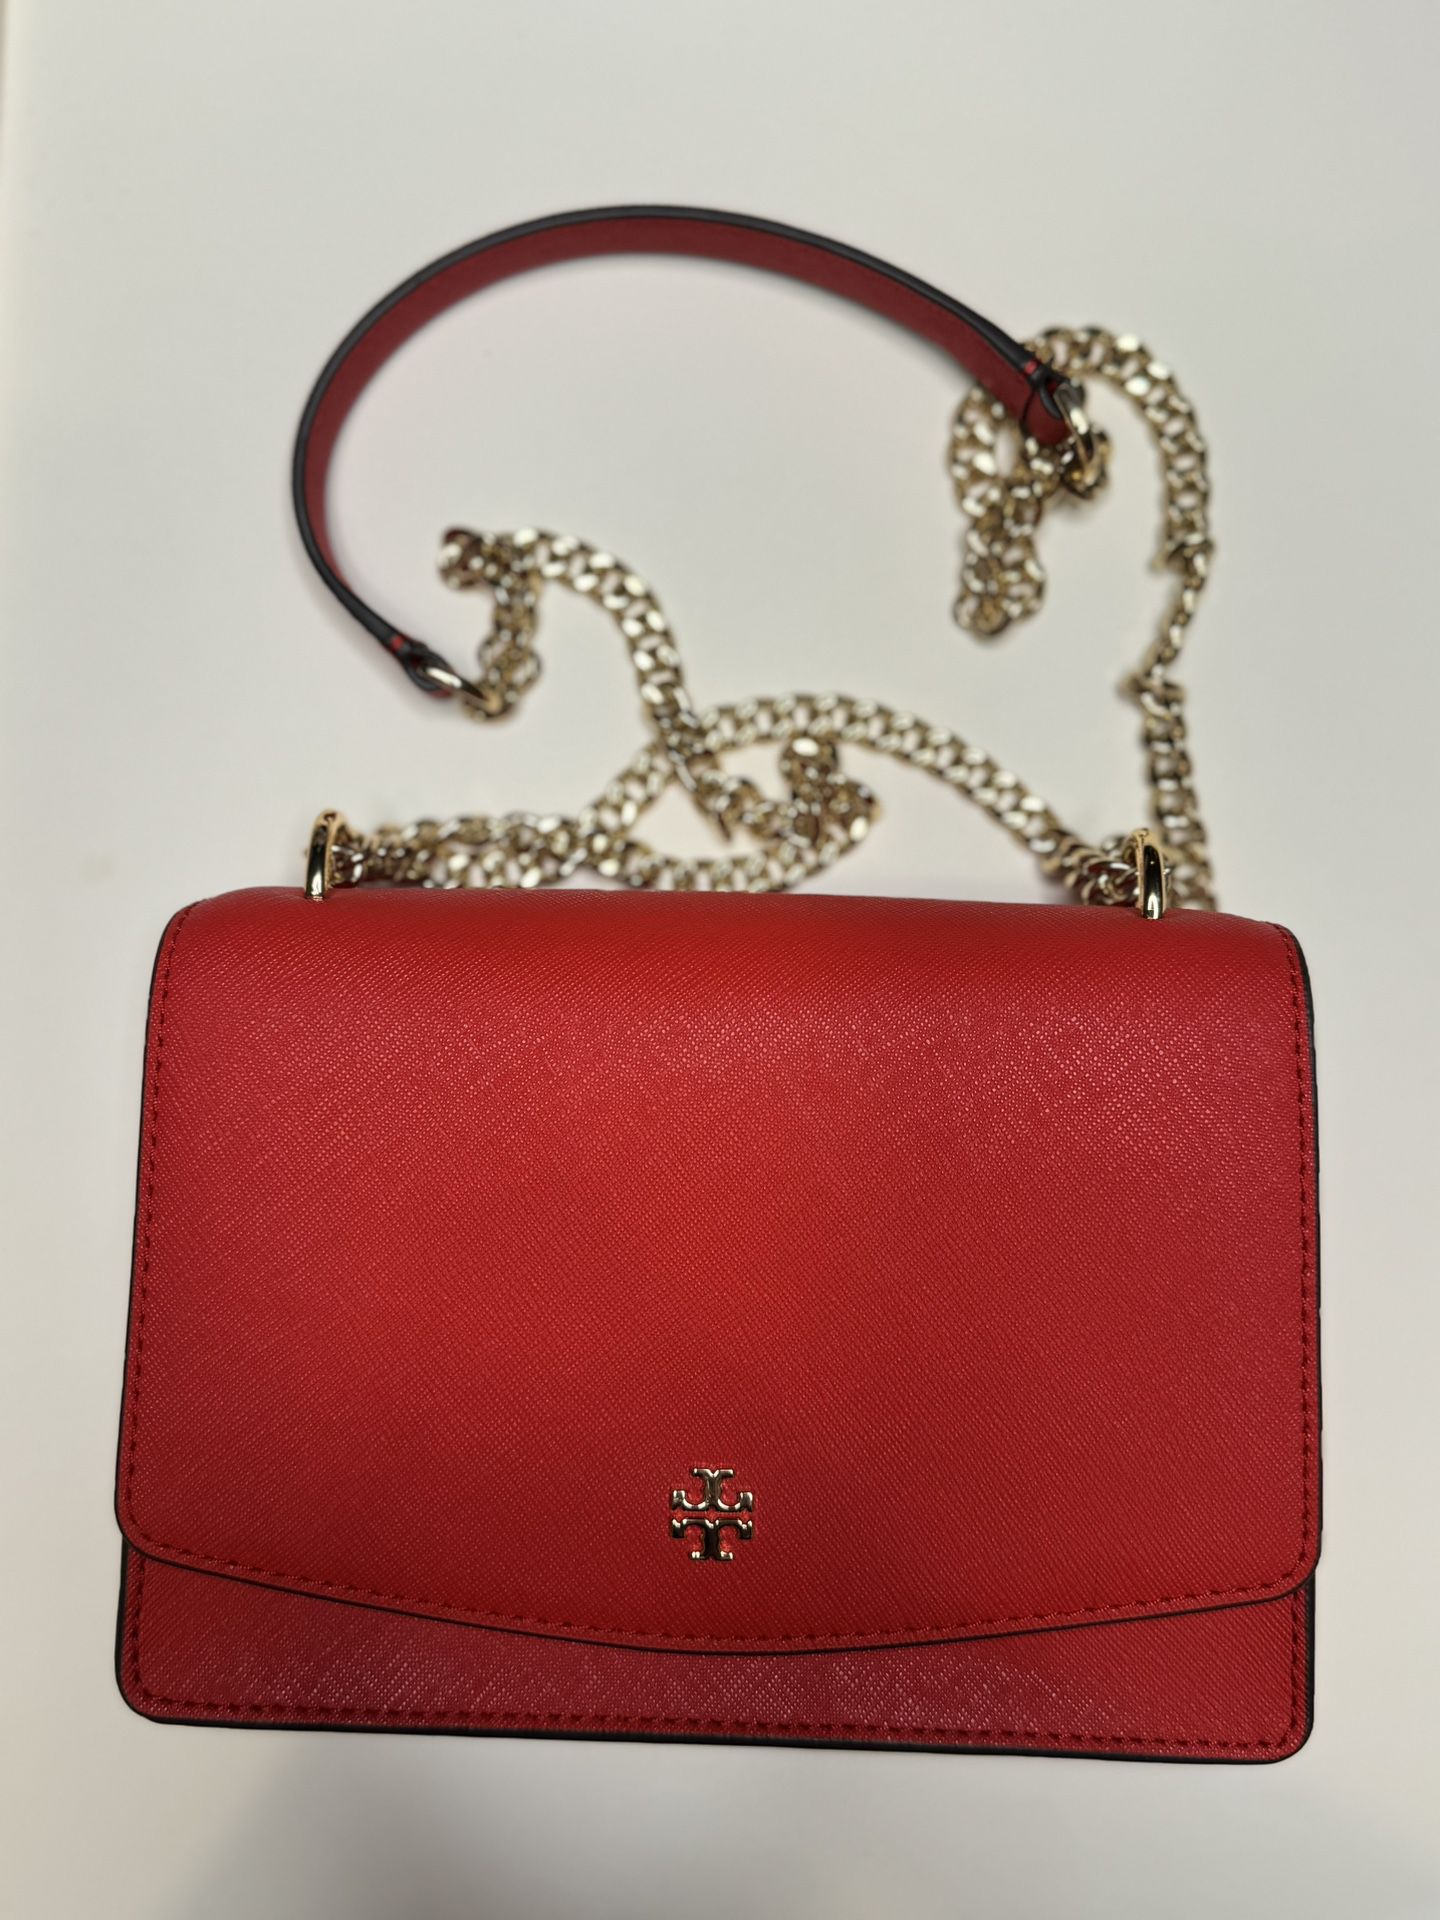 Tory Burch Robinson Women's Red Leather Flap Crossbody Purse With Chain